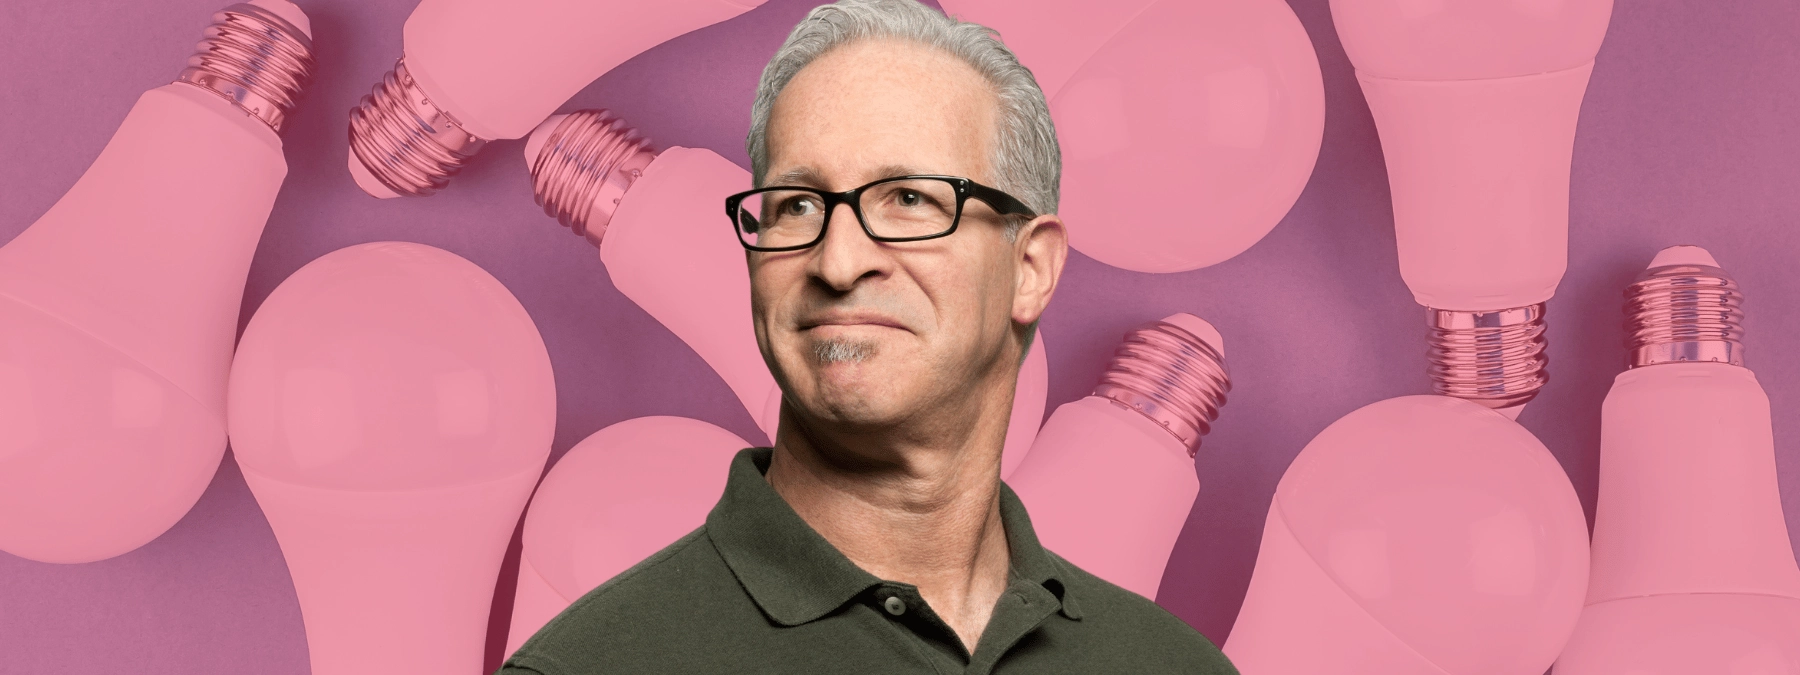 Man with glasses on a background of LED light bulbs